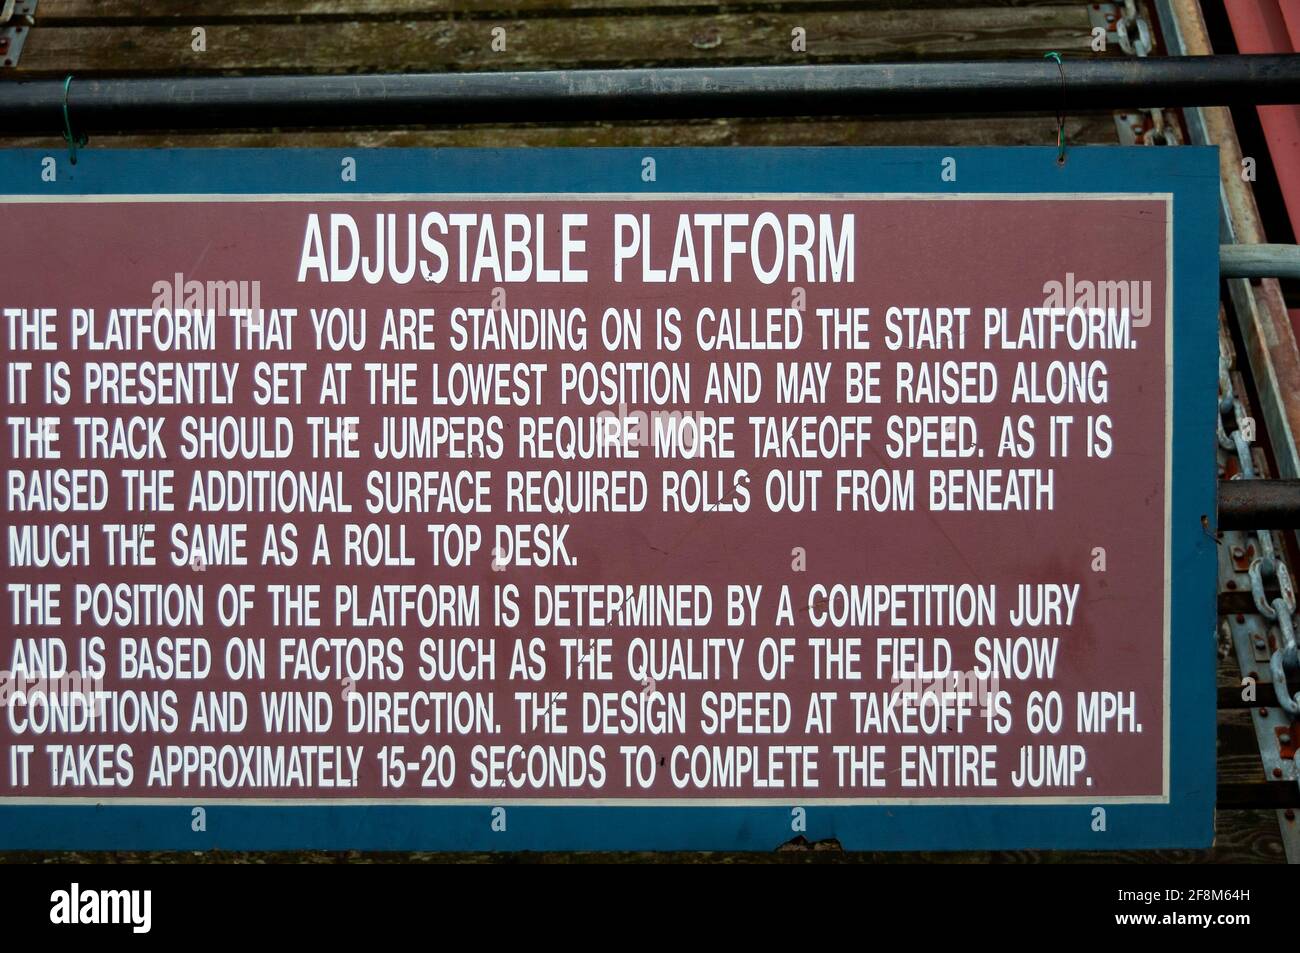 Sign in Lake Placid, New York state advertising the ski jumping complex and information about the adjustable ski platform. USA. Stock Photo